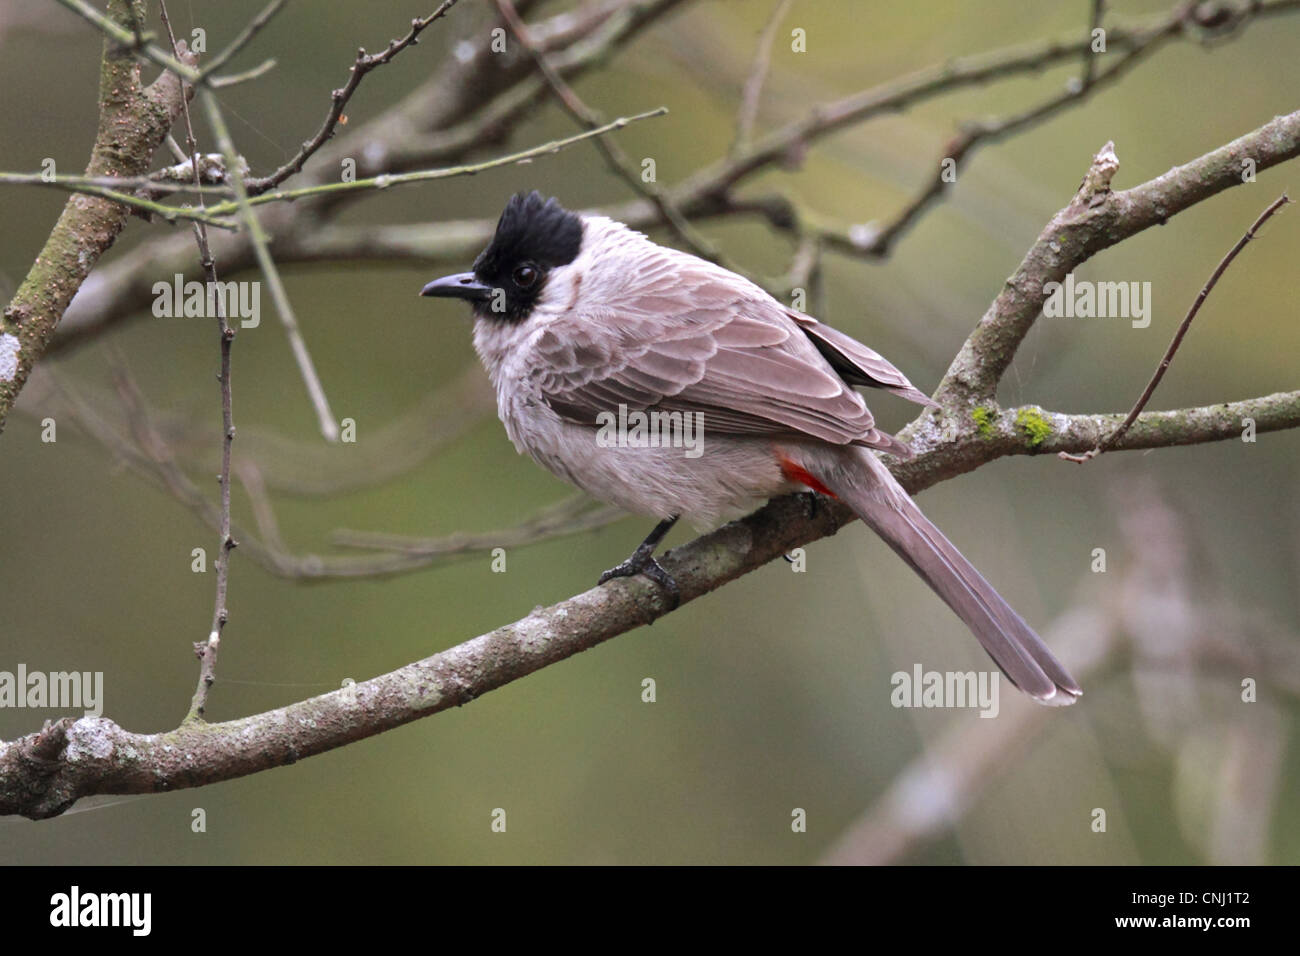 Sooty-headed Bulbul (Pycnonotus aurigaster) adult, perched on branch, Hong Kong, China, march Stock Photo